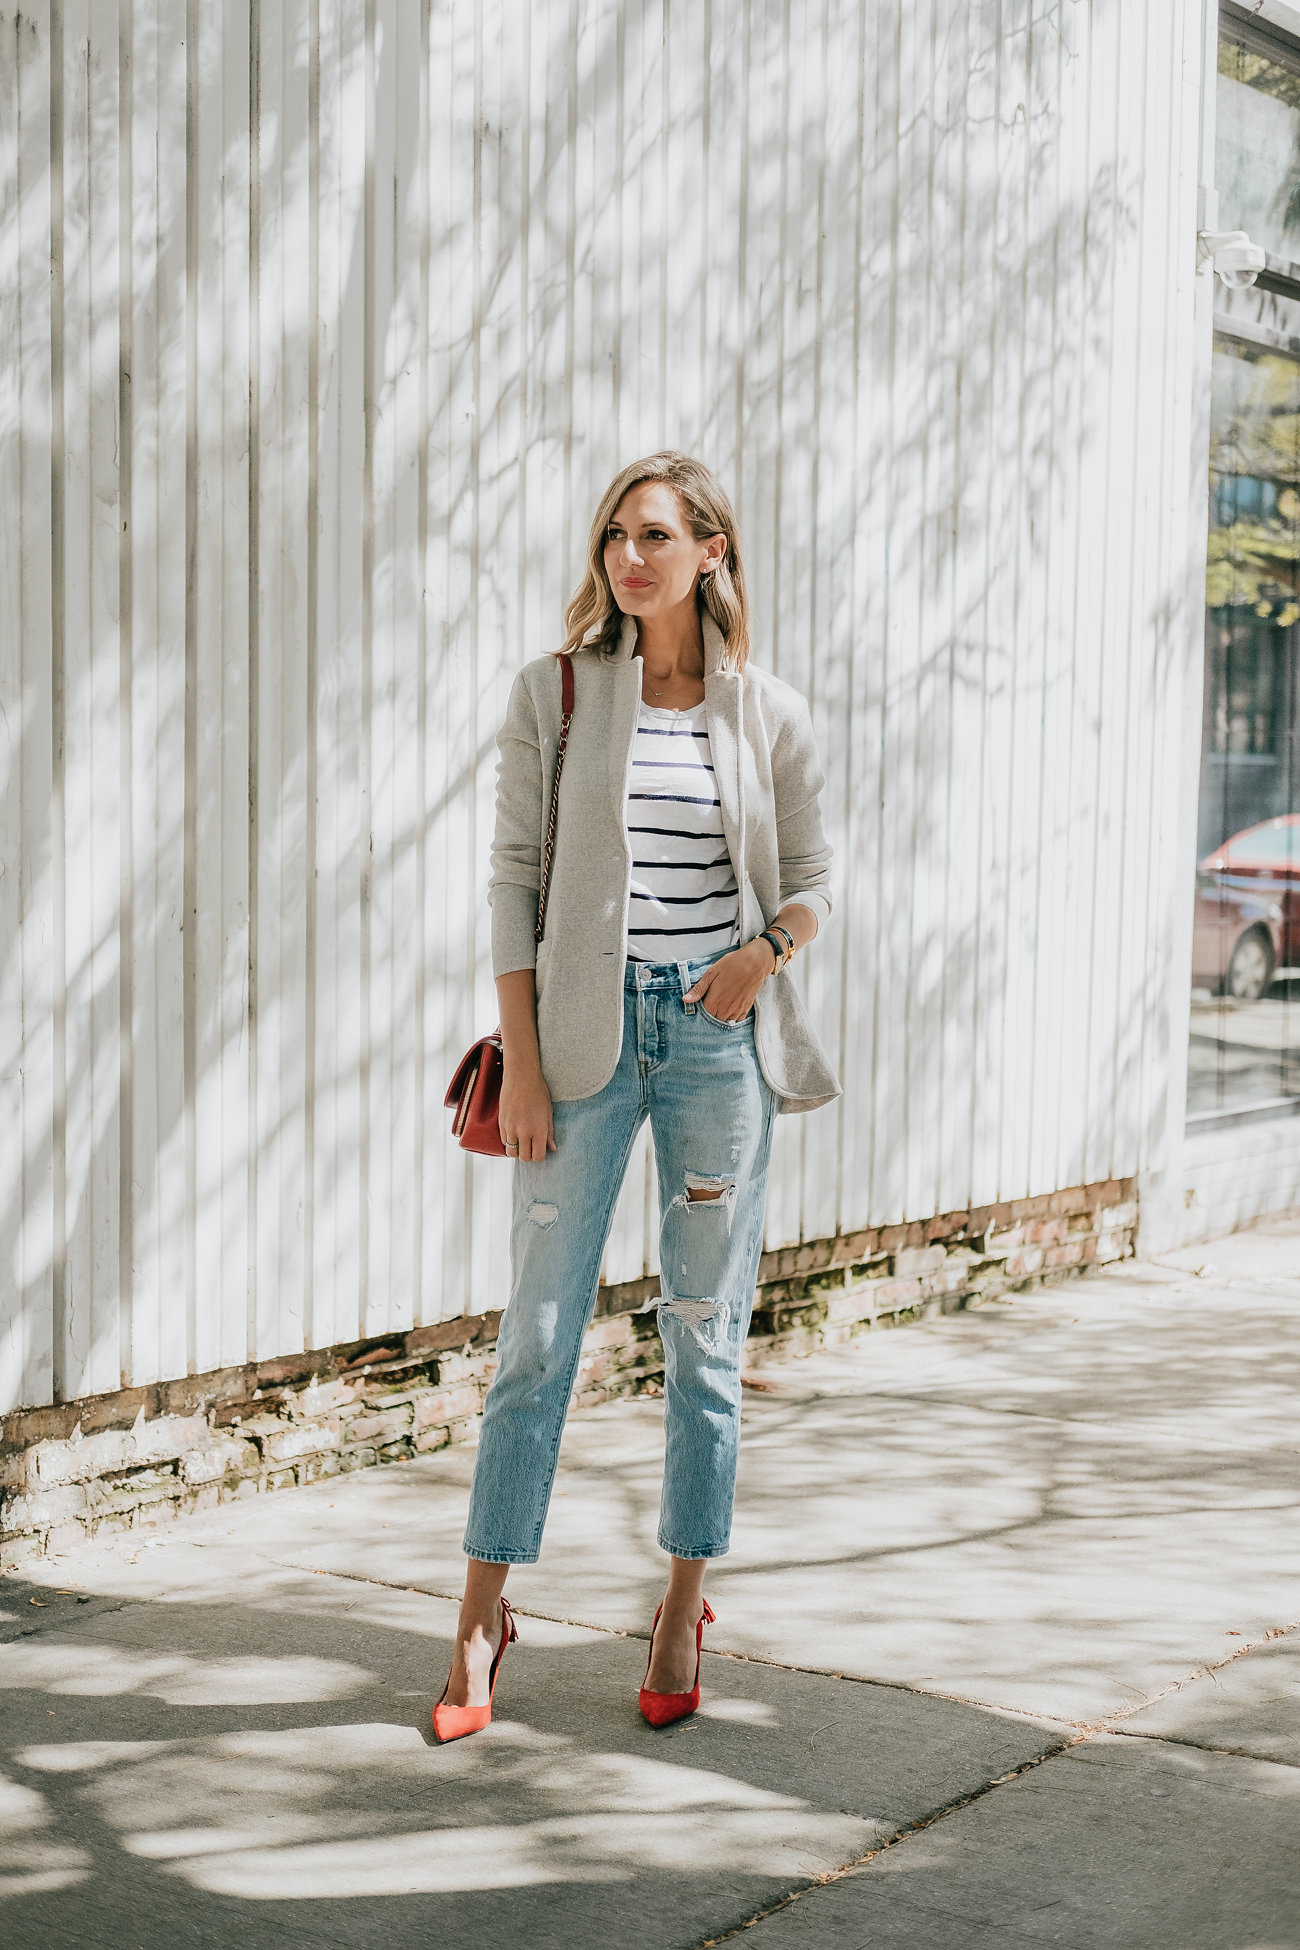 classic chic all season outfit